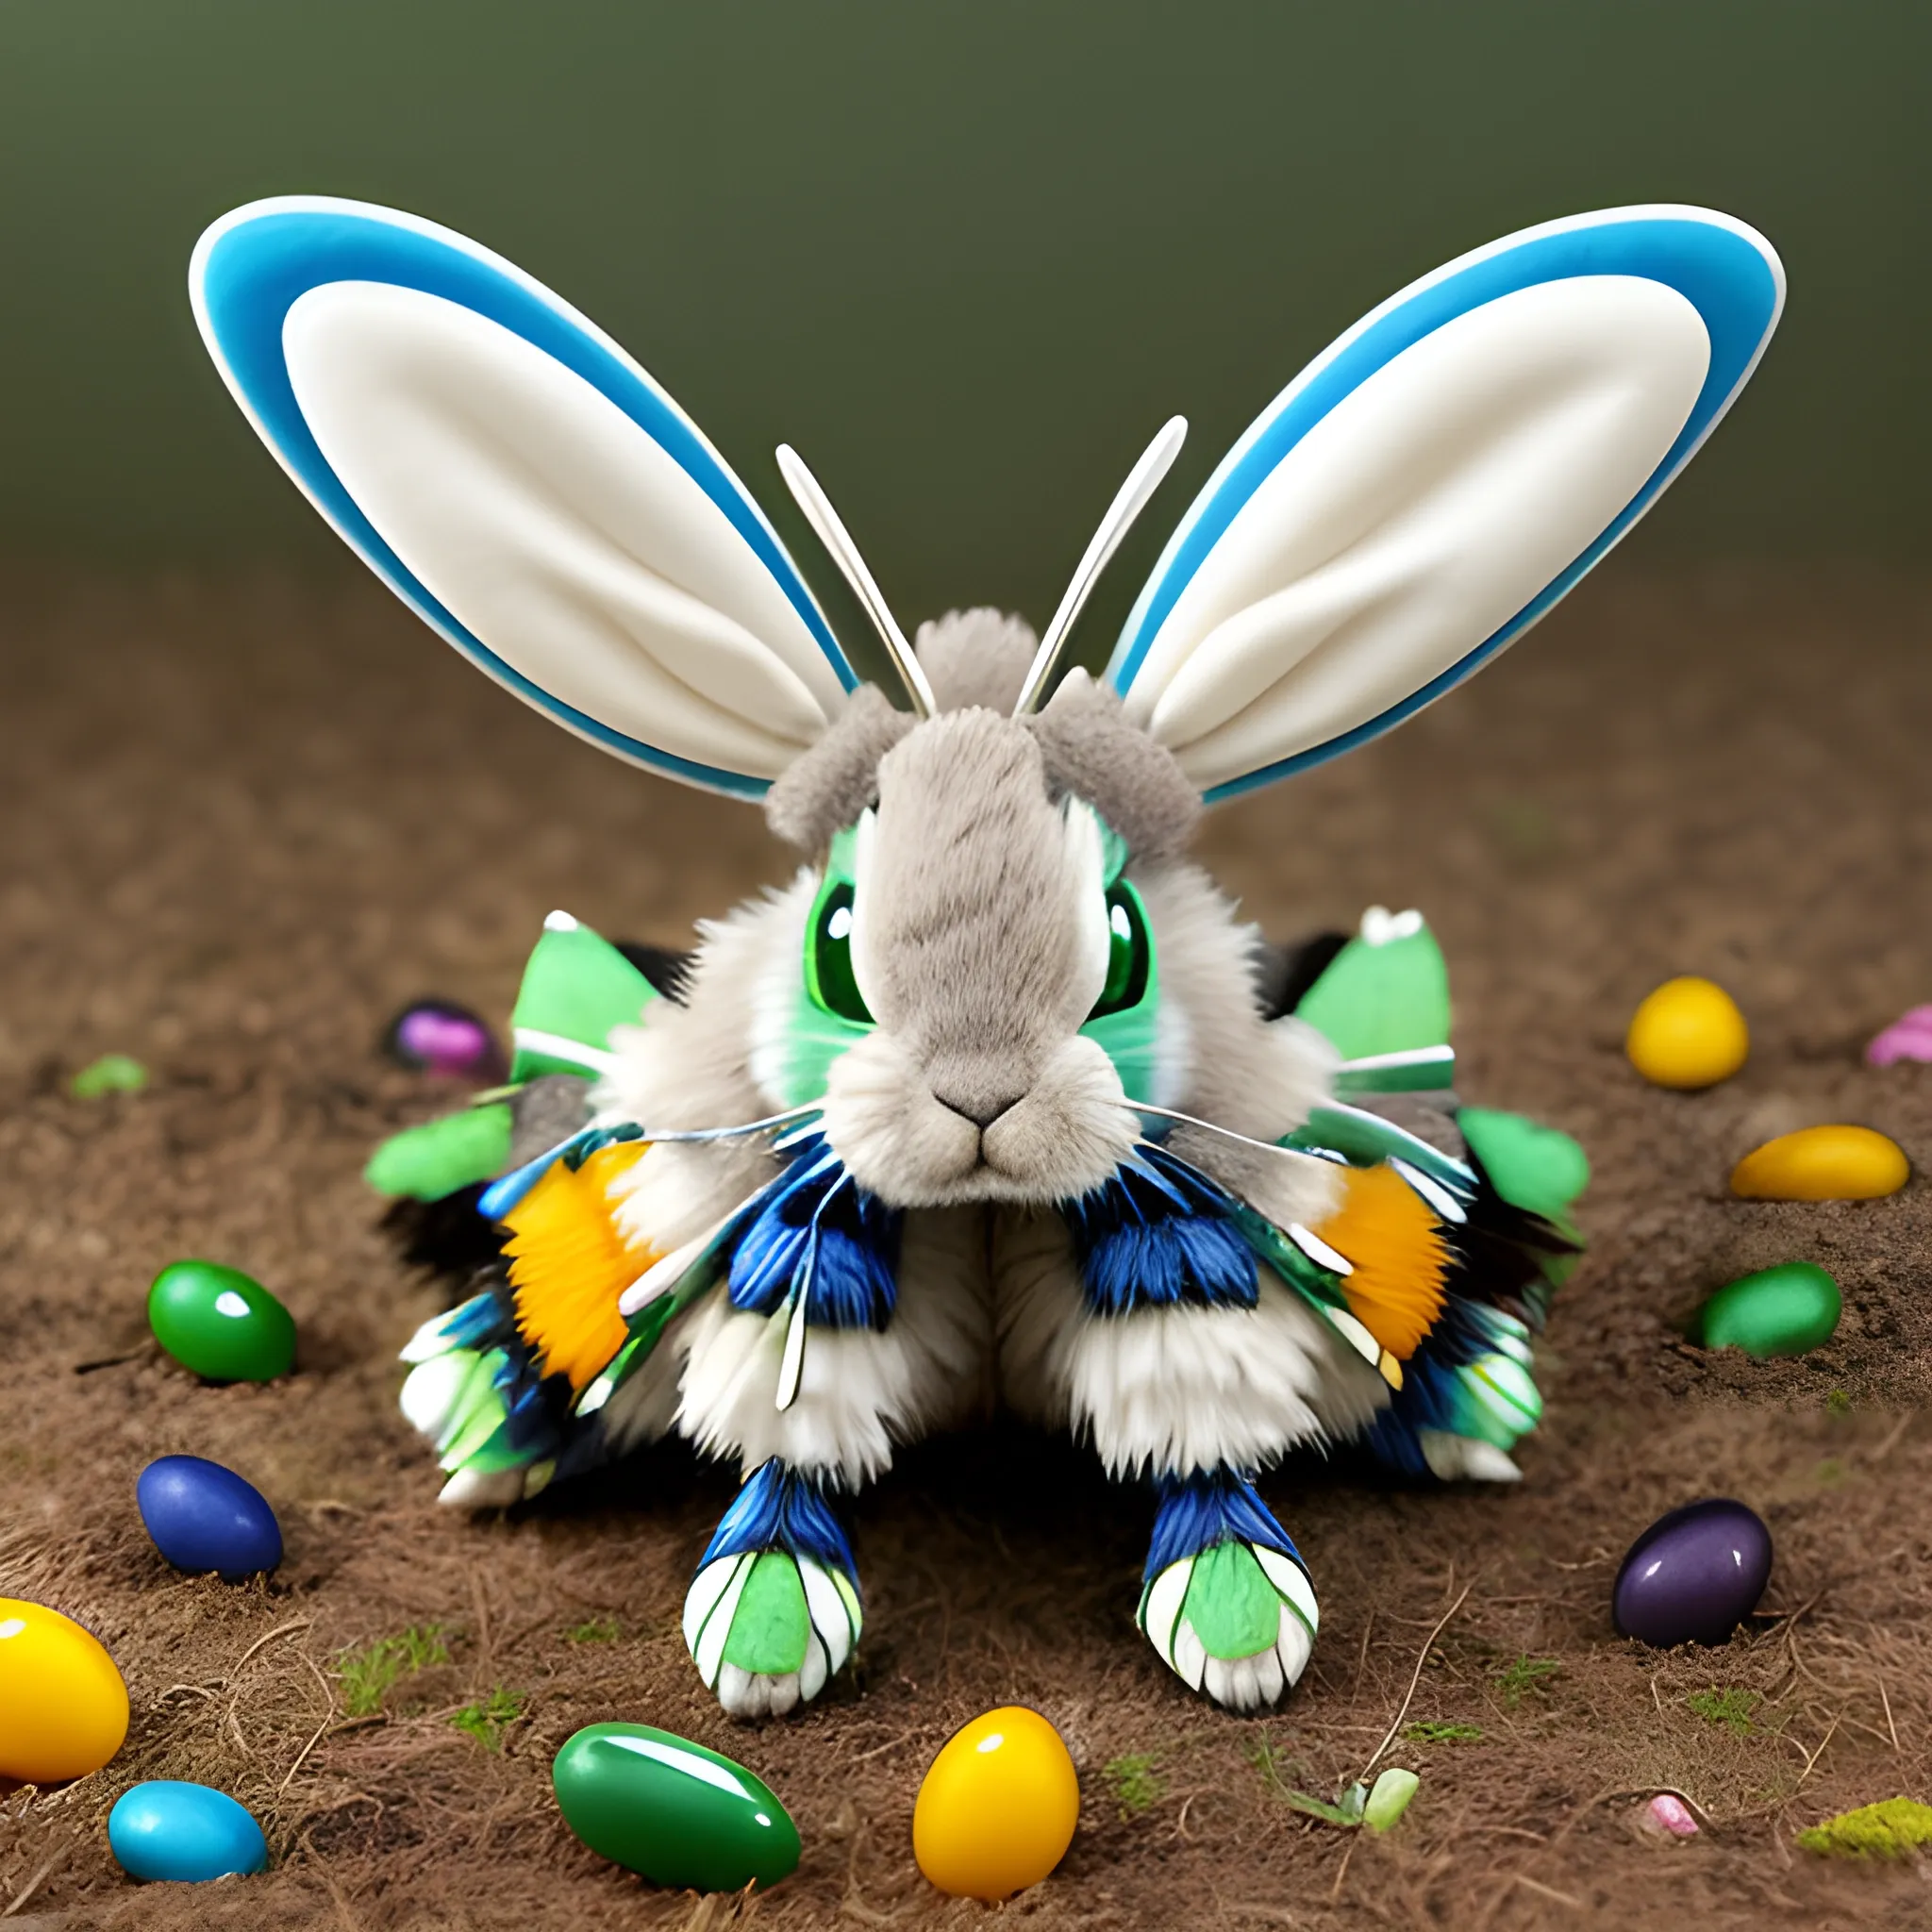 Insectile furry fluffy lapine hybrid of rabbit and bumblebee, with blue and green and white stripes, with bunny ears and butterfly wings, with predatory mandibles and segmented body and six jointed legs with tube feet, with brightly coloured eggs, on rough scrubland, at night, very detailed, photorealistic
